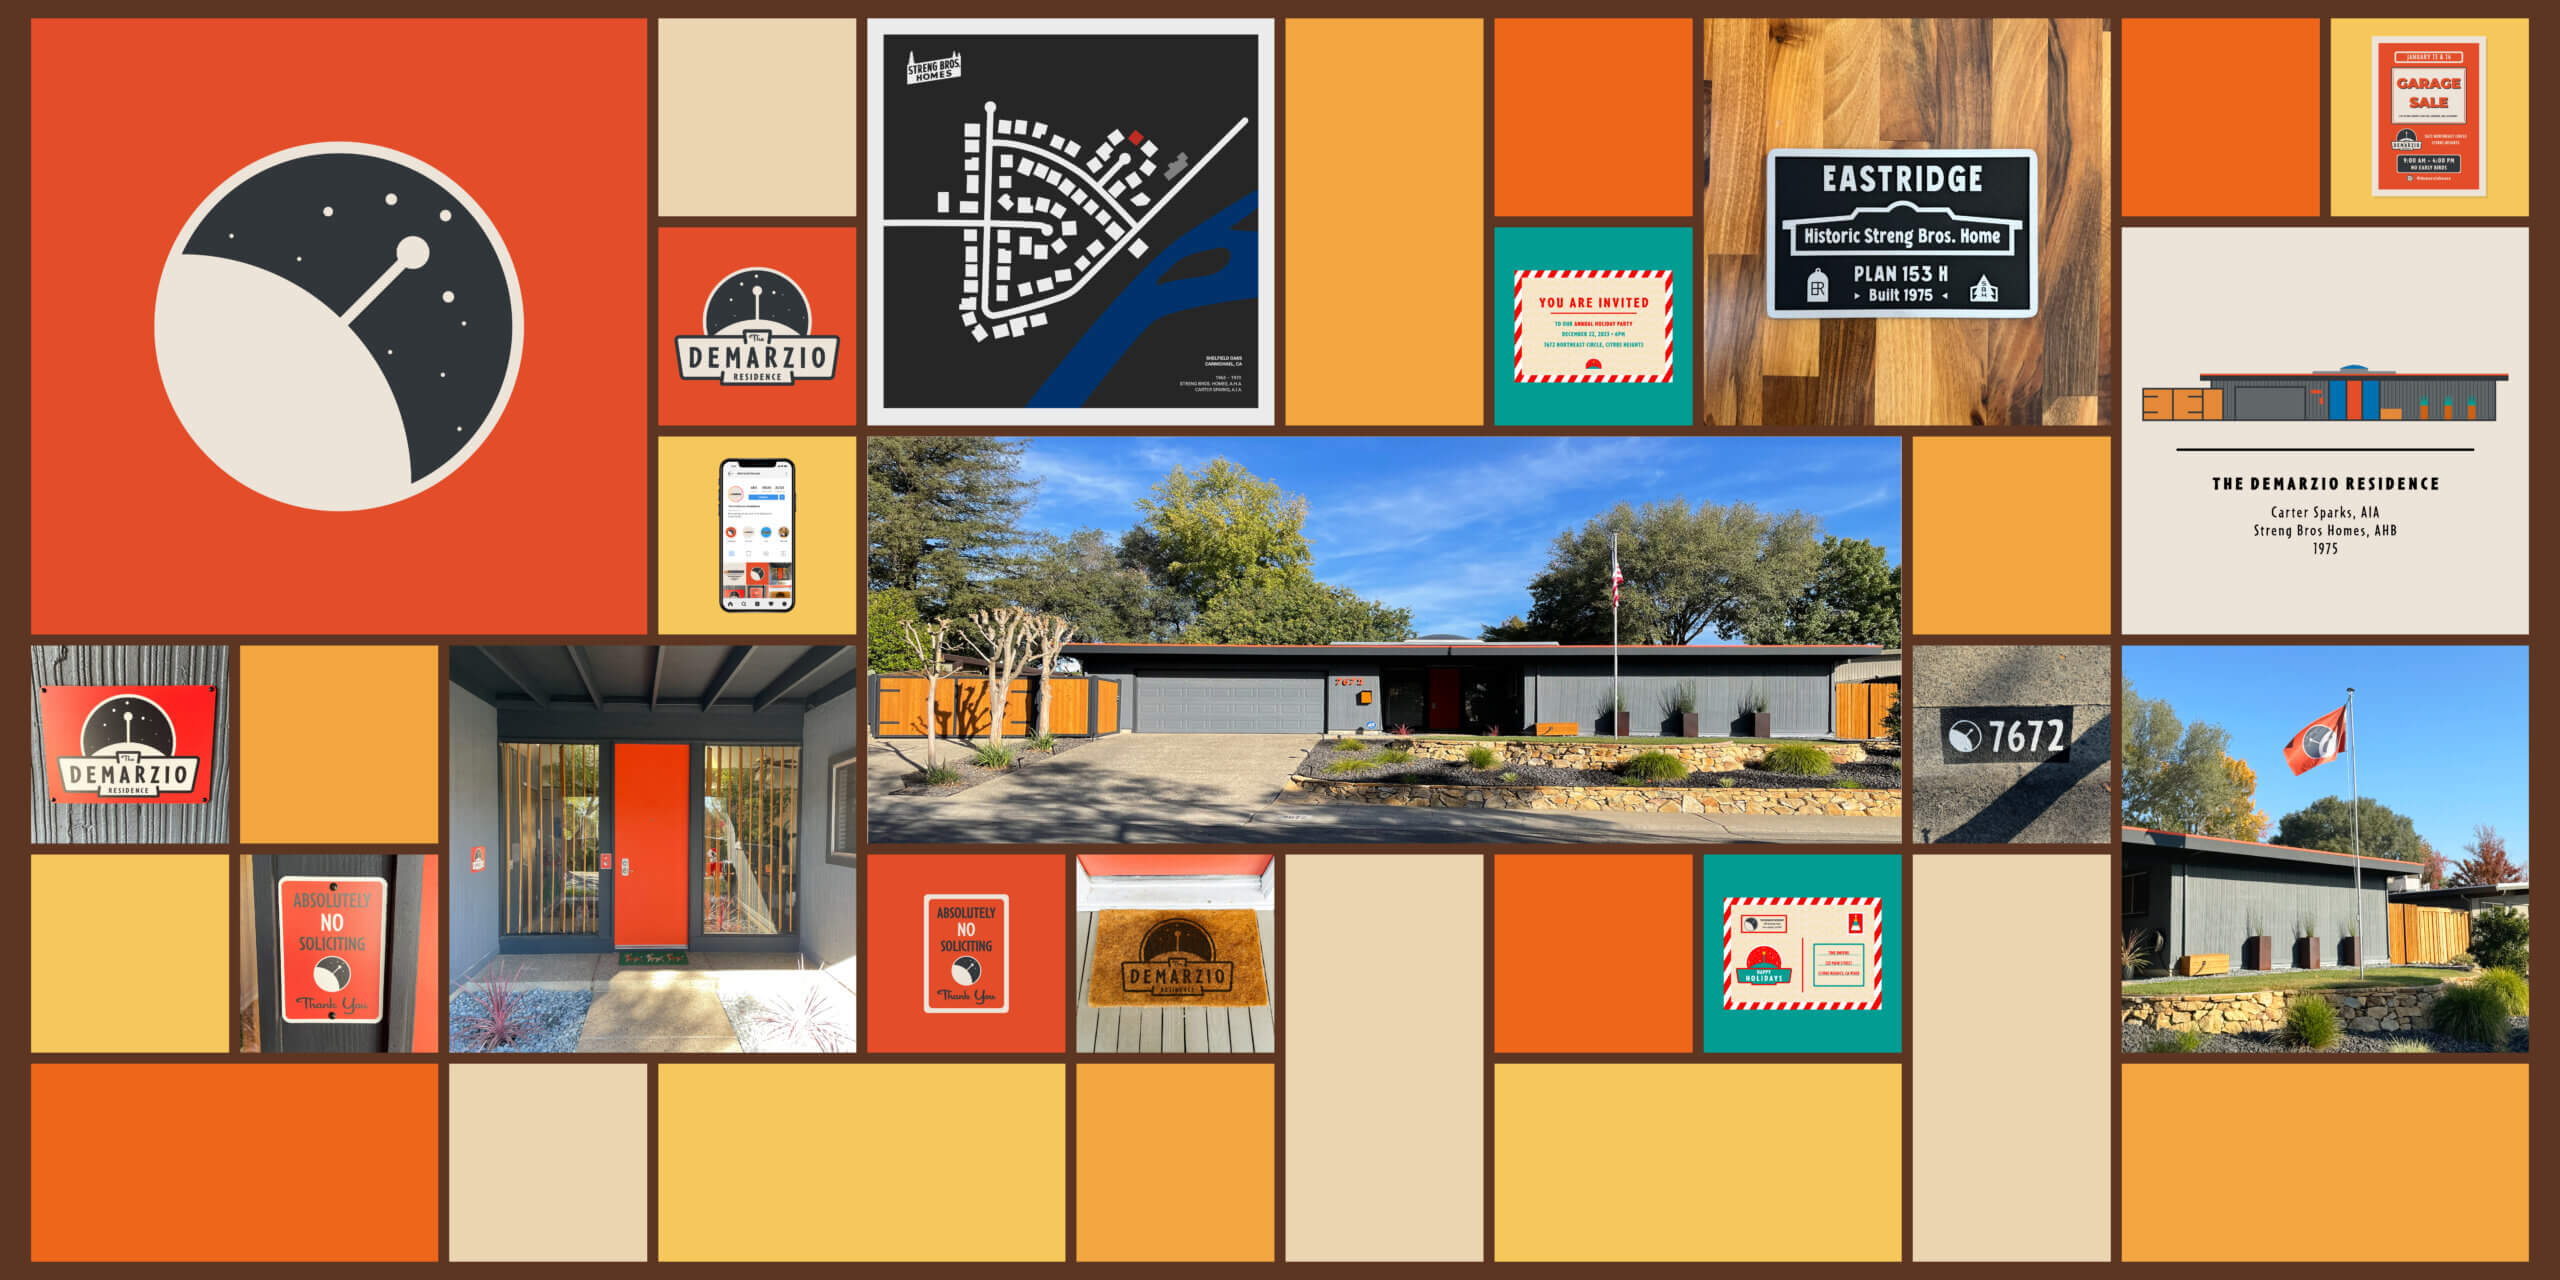 images featuring digital and real world examples of house branding services offered by Foxface Design, including logos, signage like historic home plaques, print collateral, a neighborhood map, painted curb numbers, and a custom flag